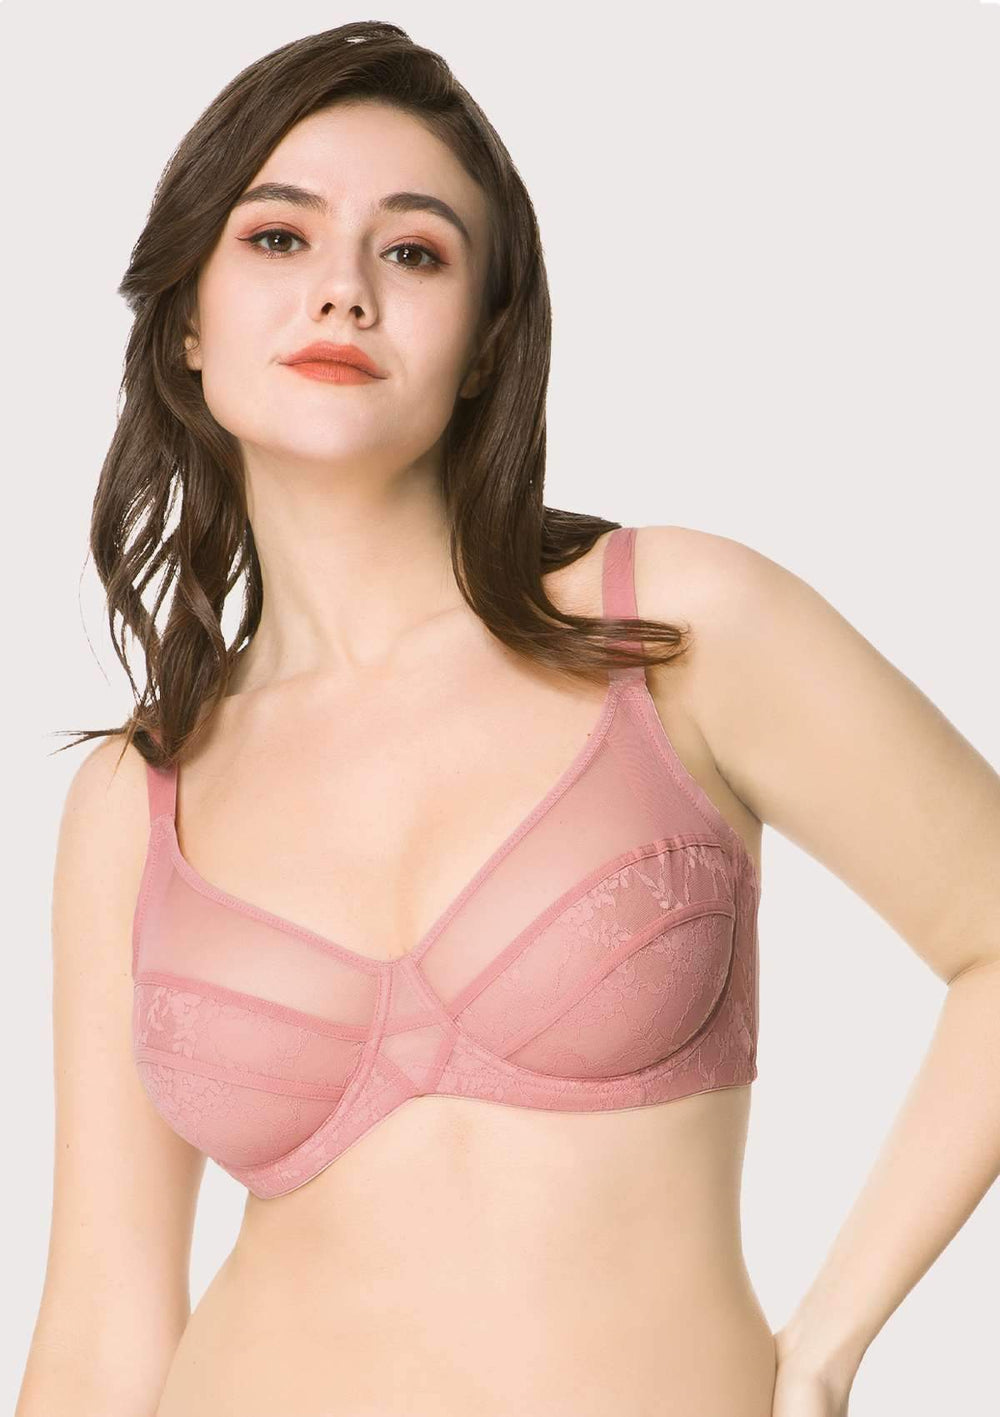 24 Wholesale Women's Full Cup 34c Bras In 4 Assorted Colors - at 